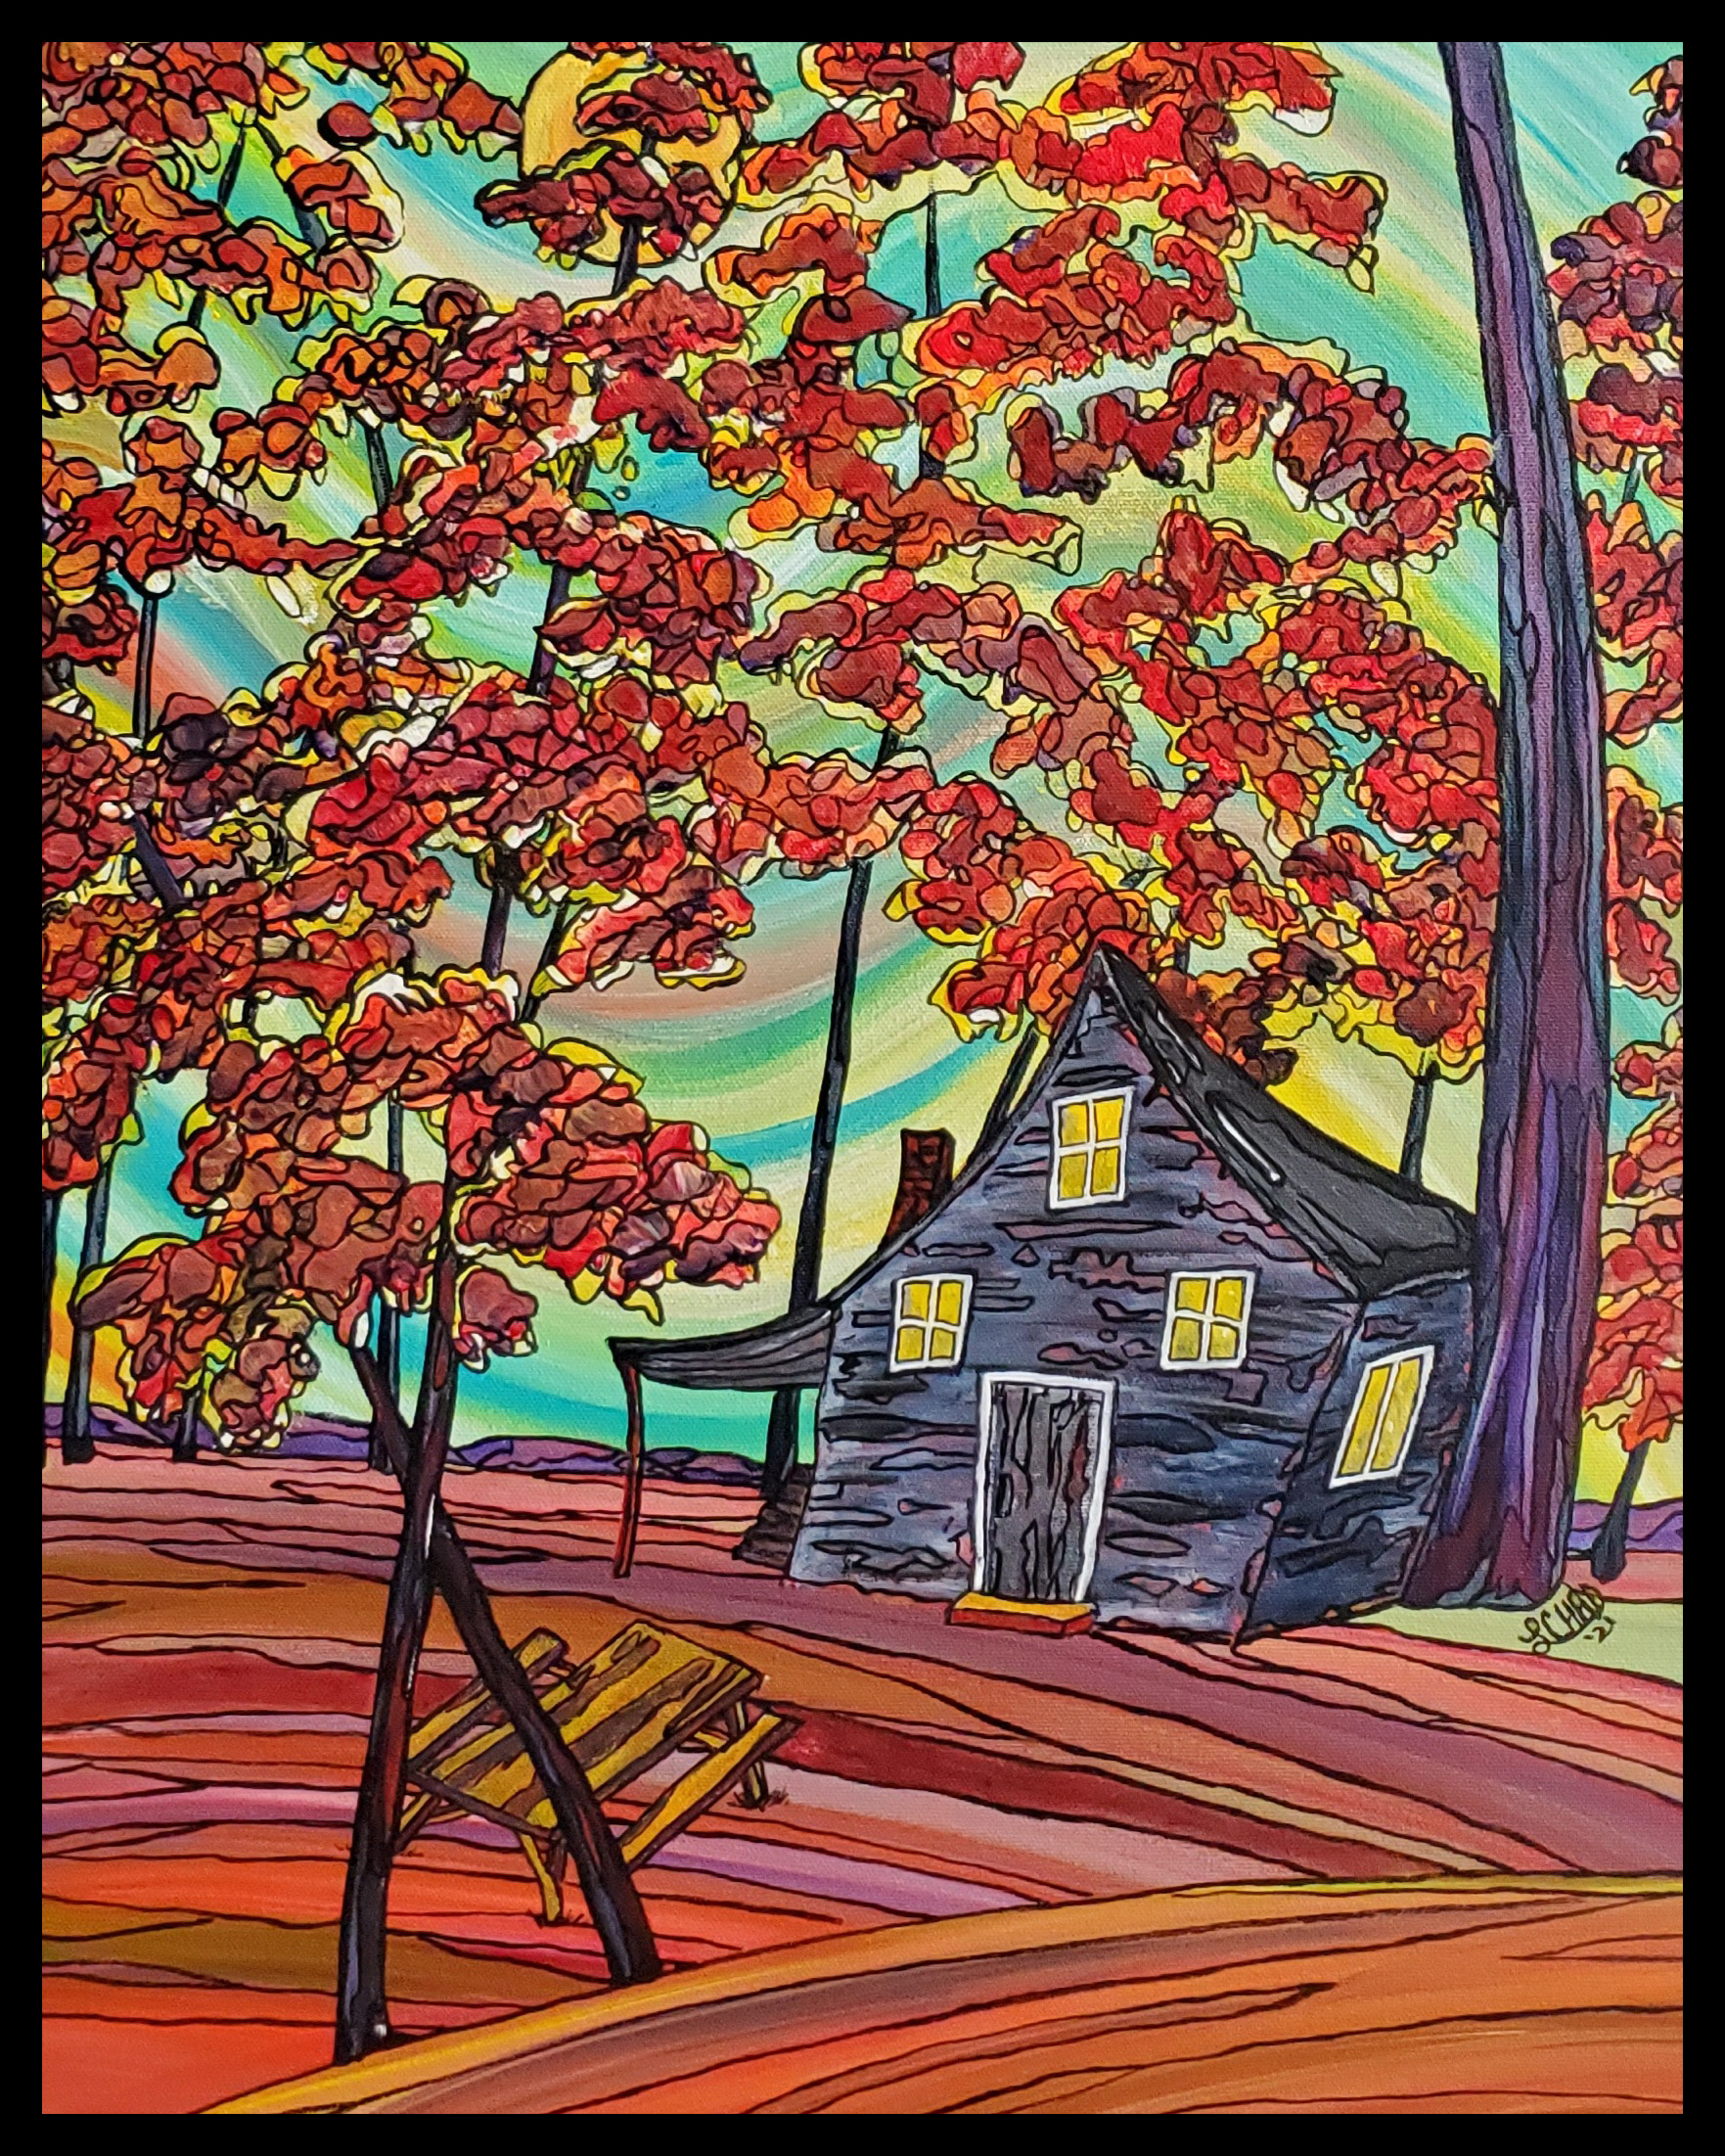 2021 "Fall Prairie House"
Framed: 22" x 26"
Acrylic on Canvas
Commissioned SOLD